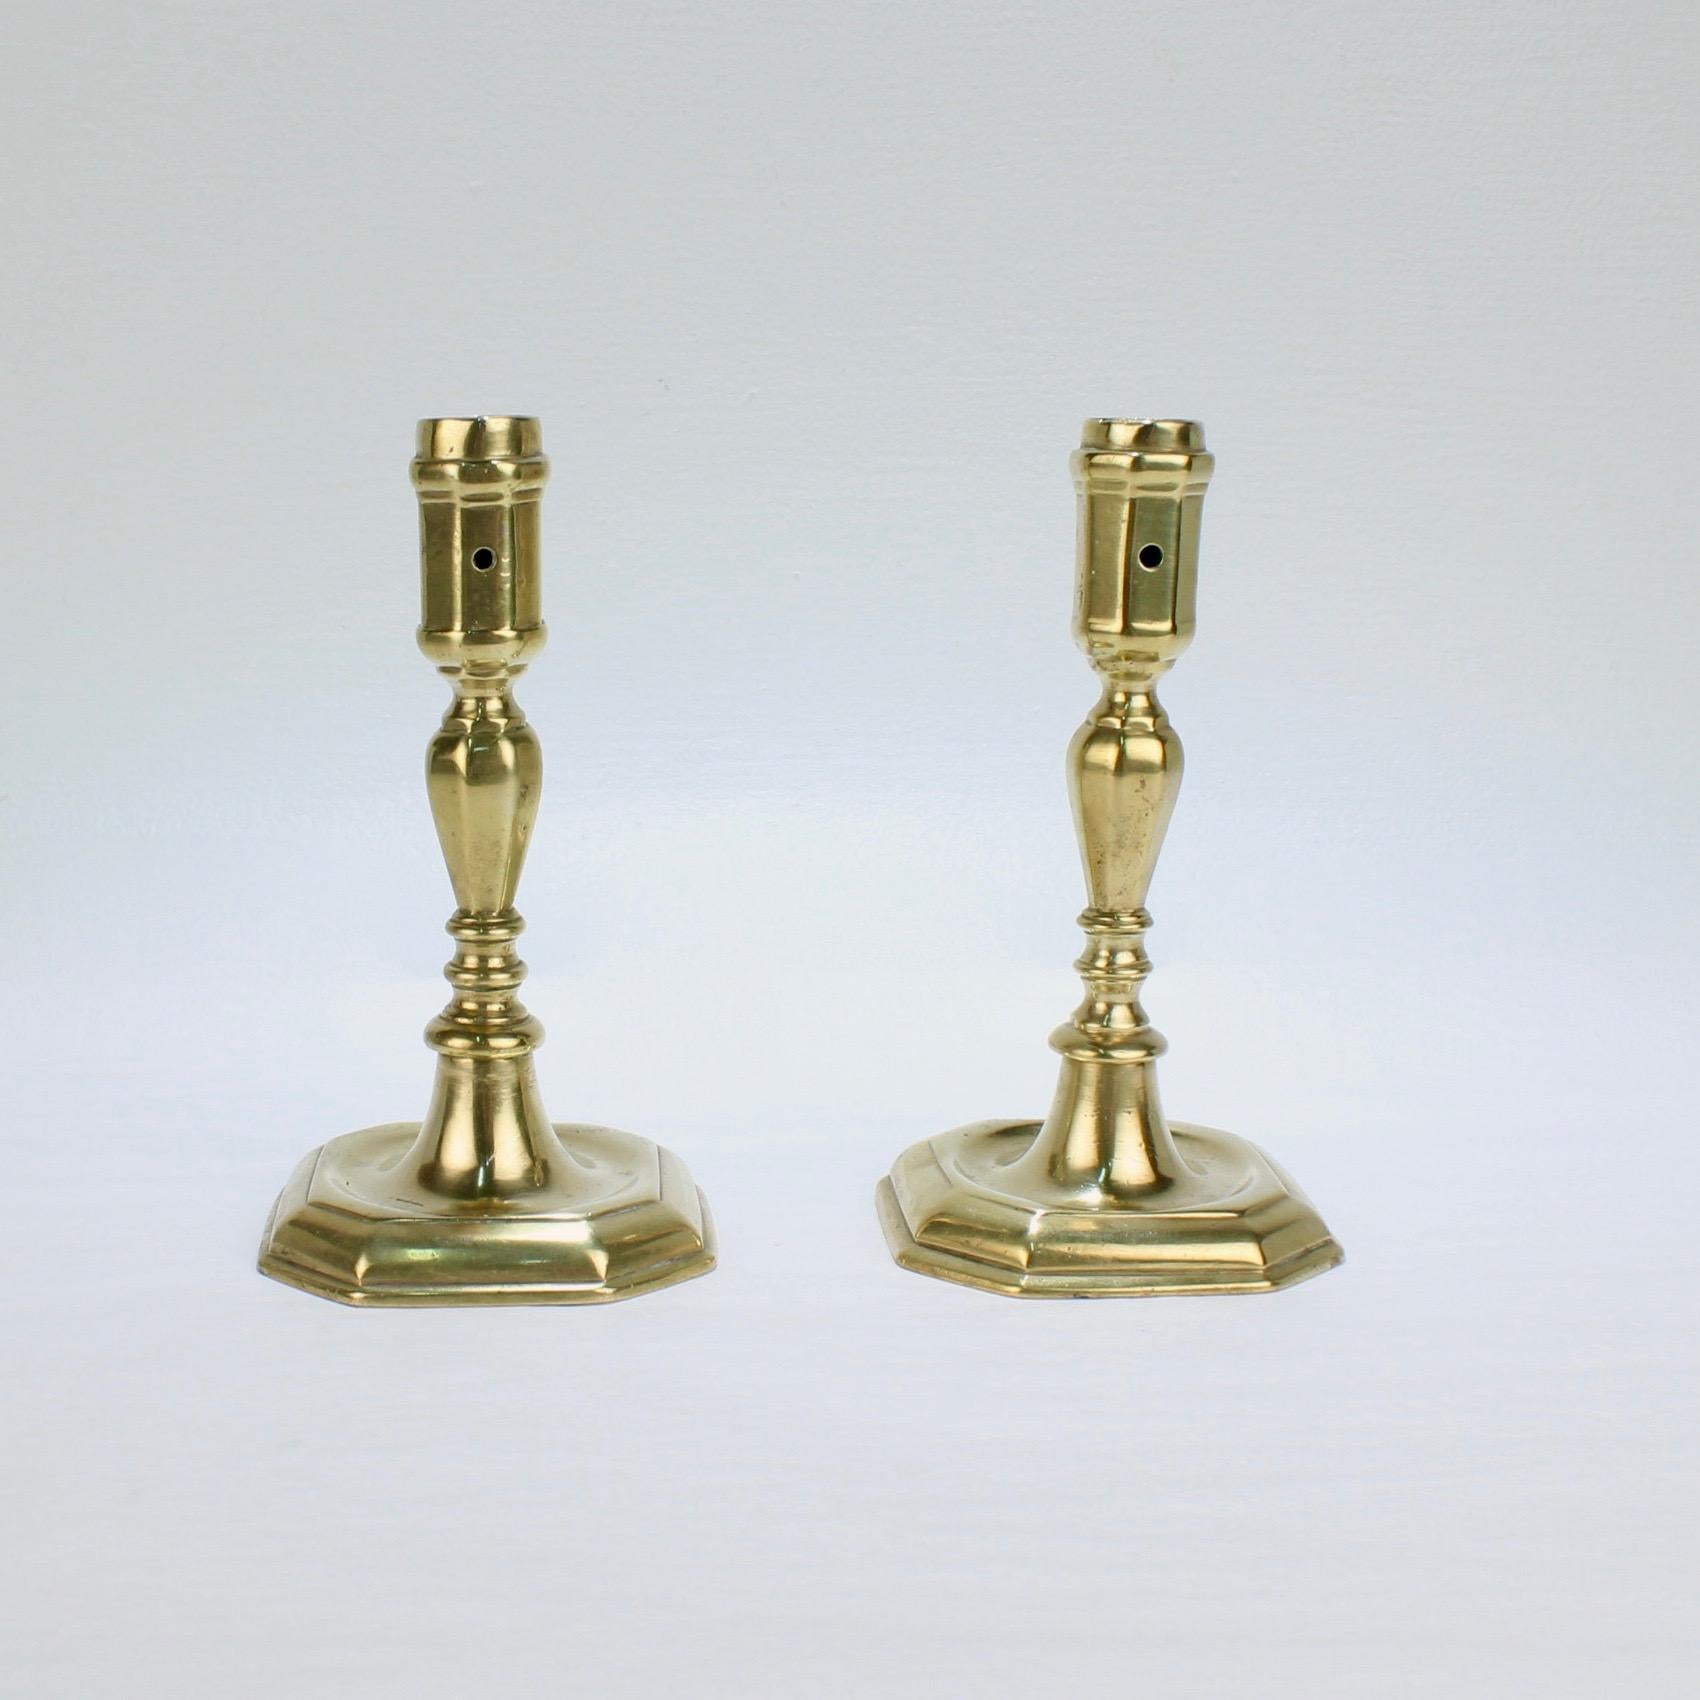 Baroque Pair of Early 18th Century French or English Faceted Brass Candlesticks For Sale